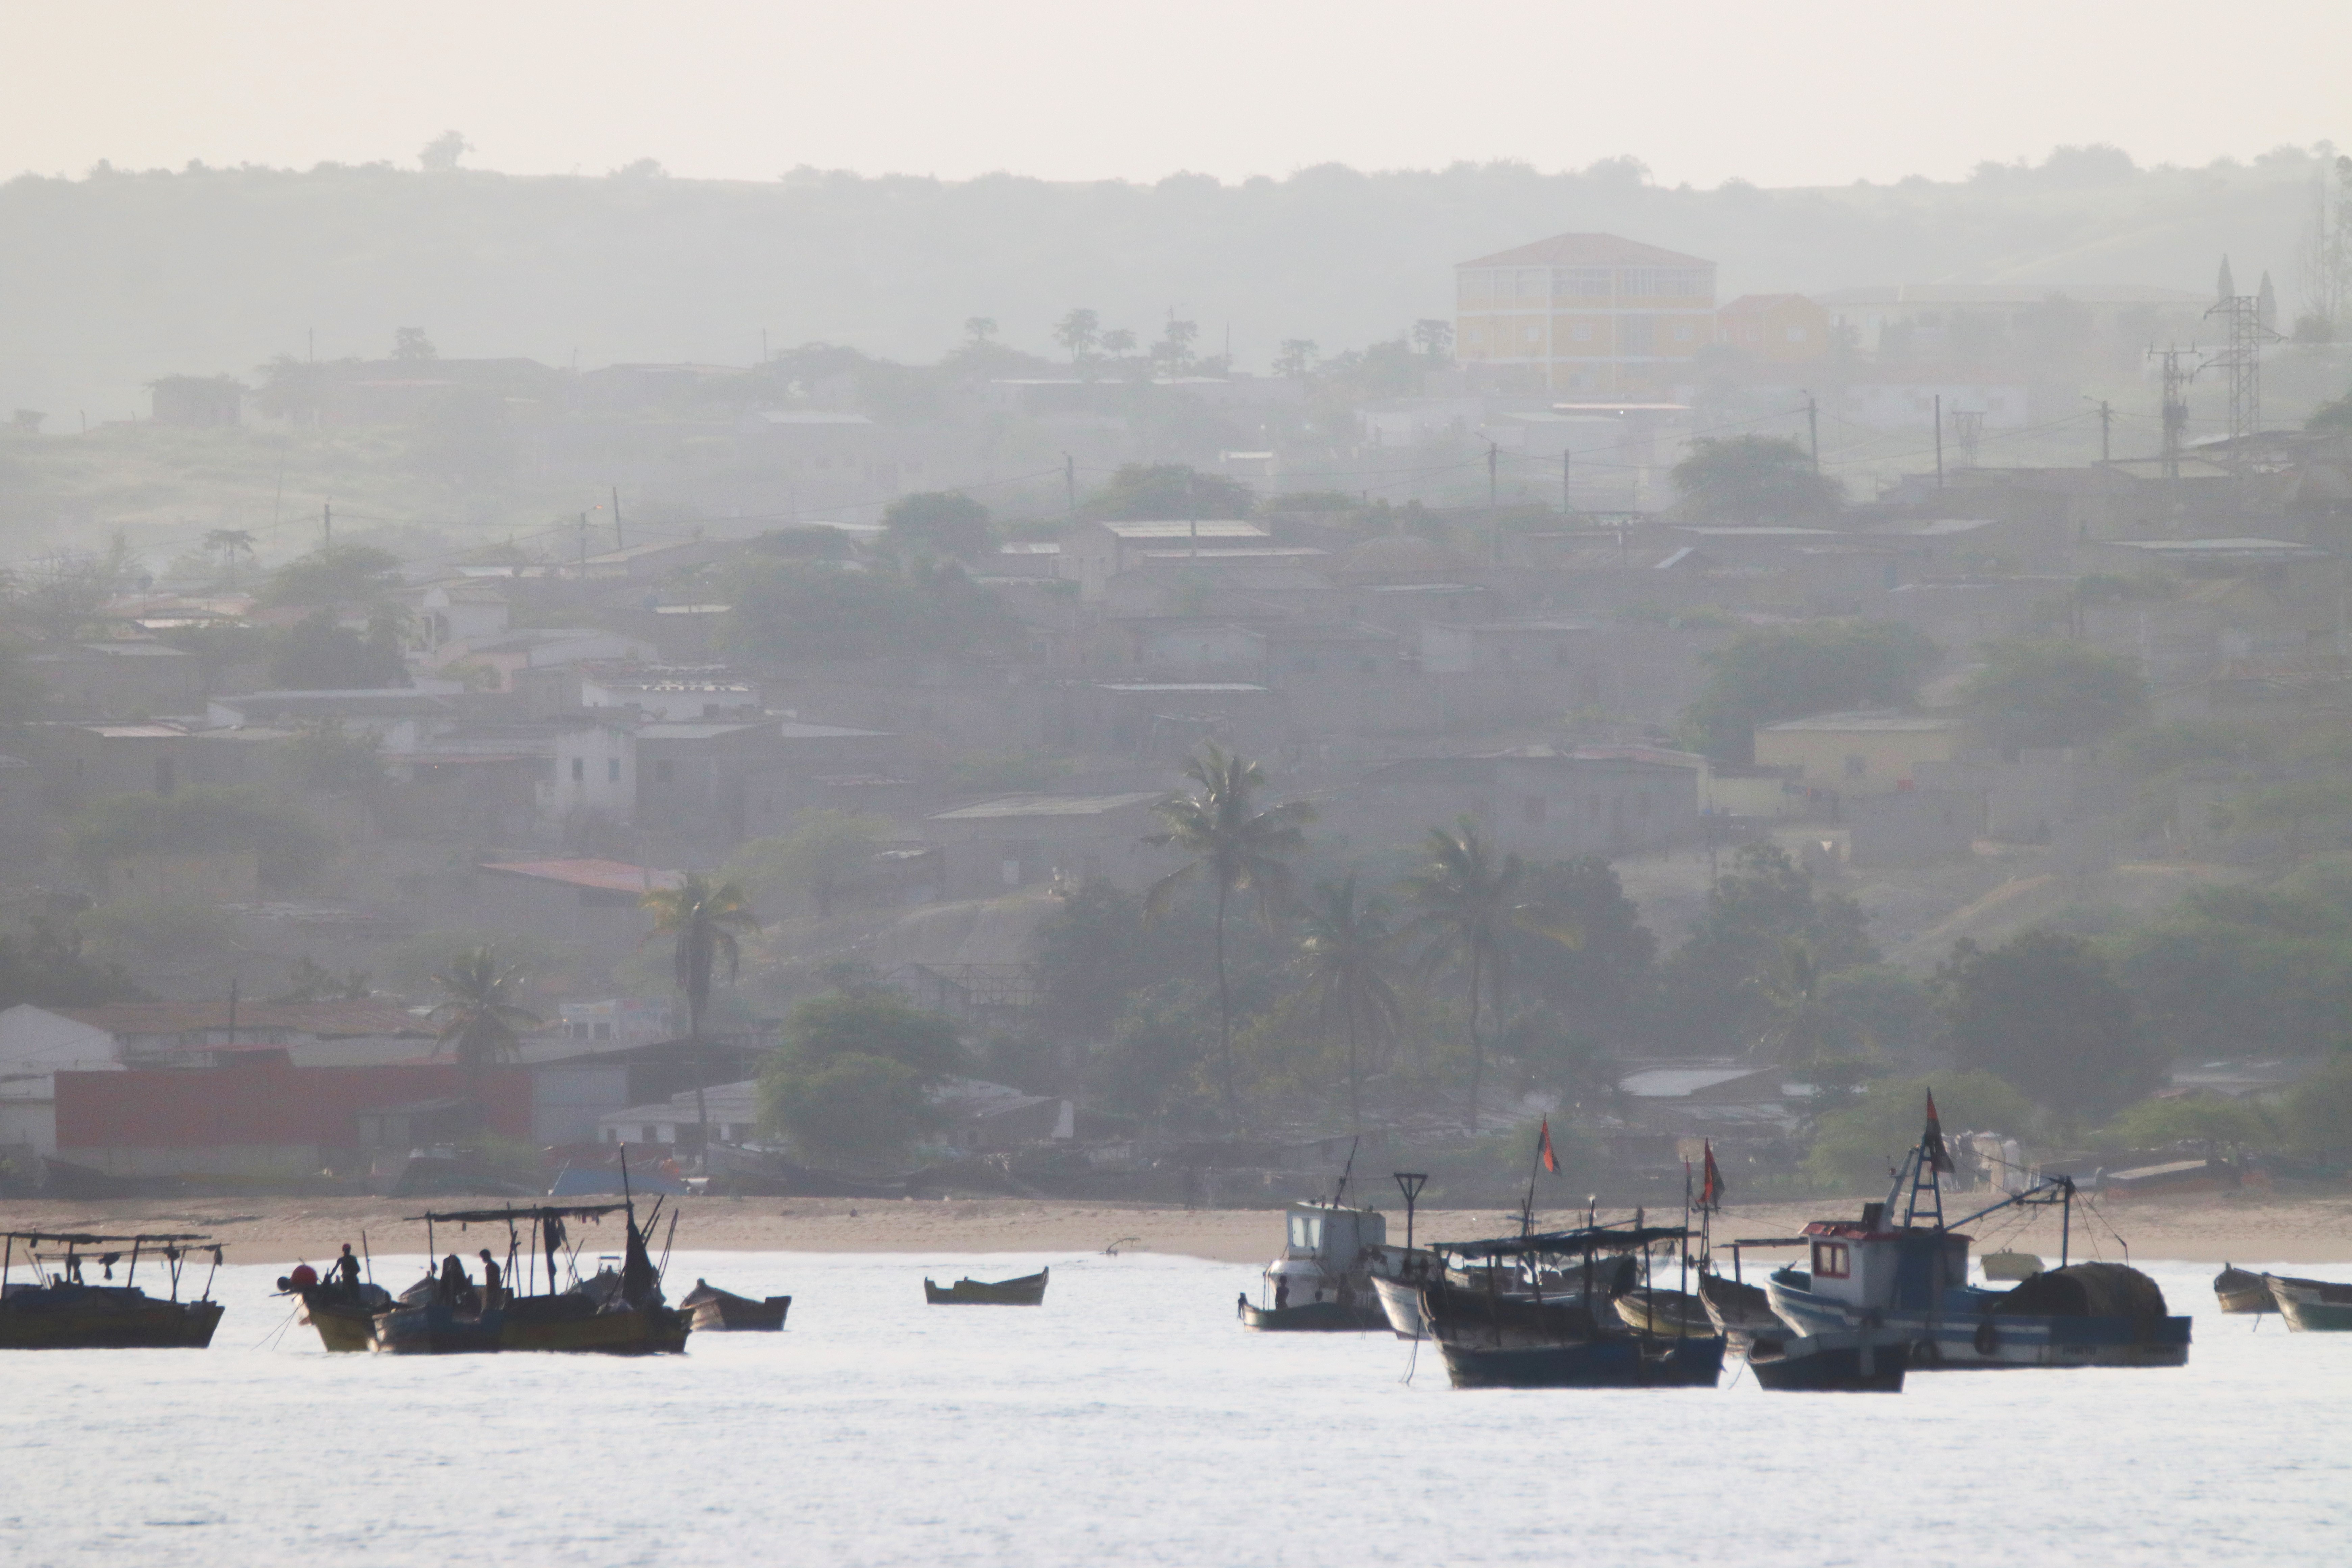 Small fishing boats on the water with palm trees and houses on land in the background.